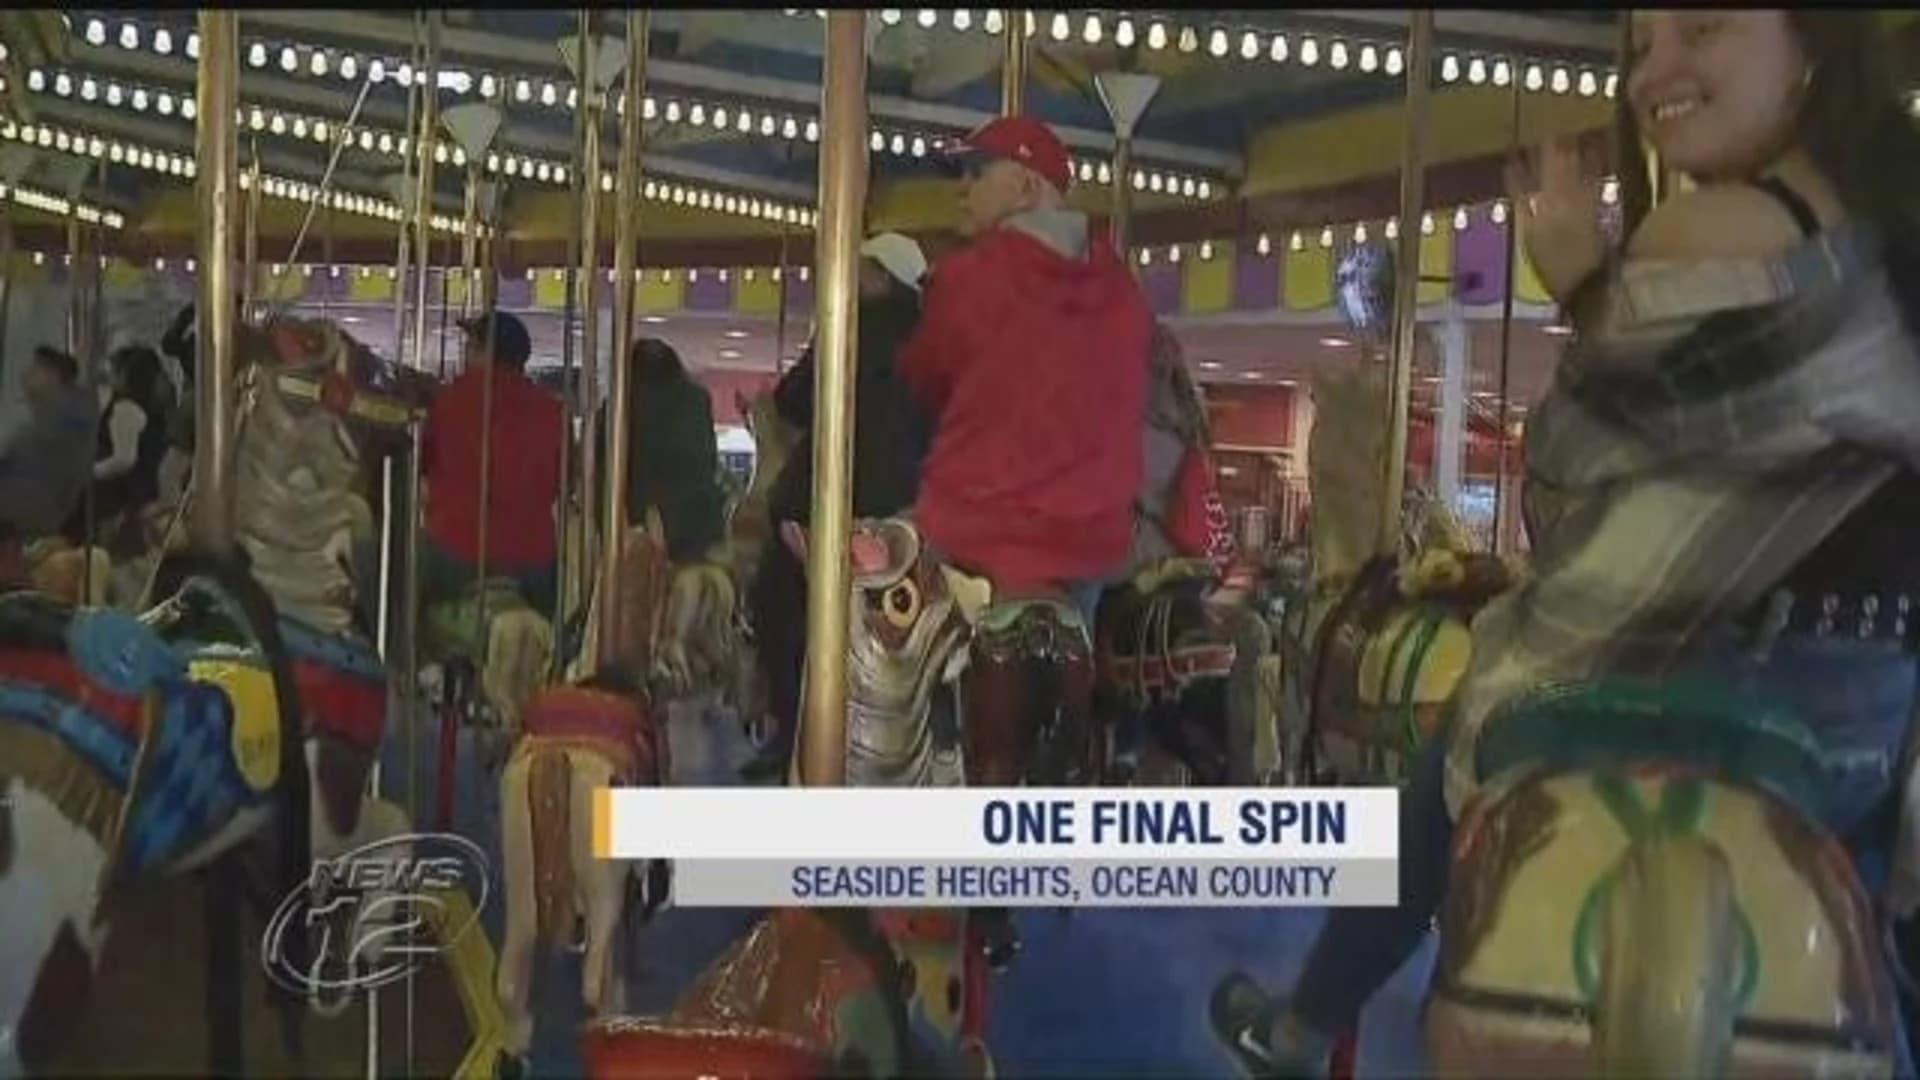 One last spin: Iconic Casino Pier Carousel takes final ride